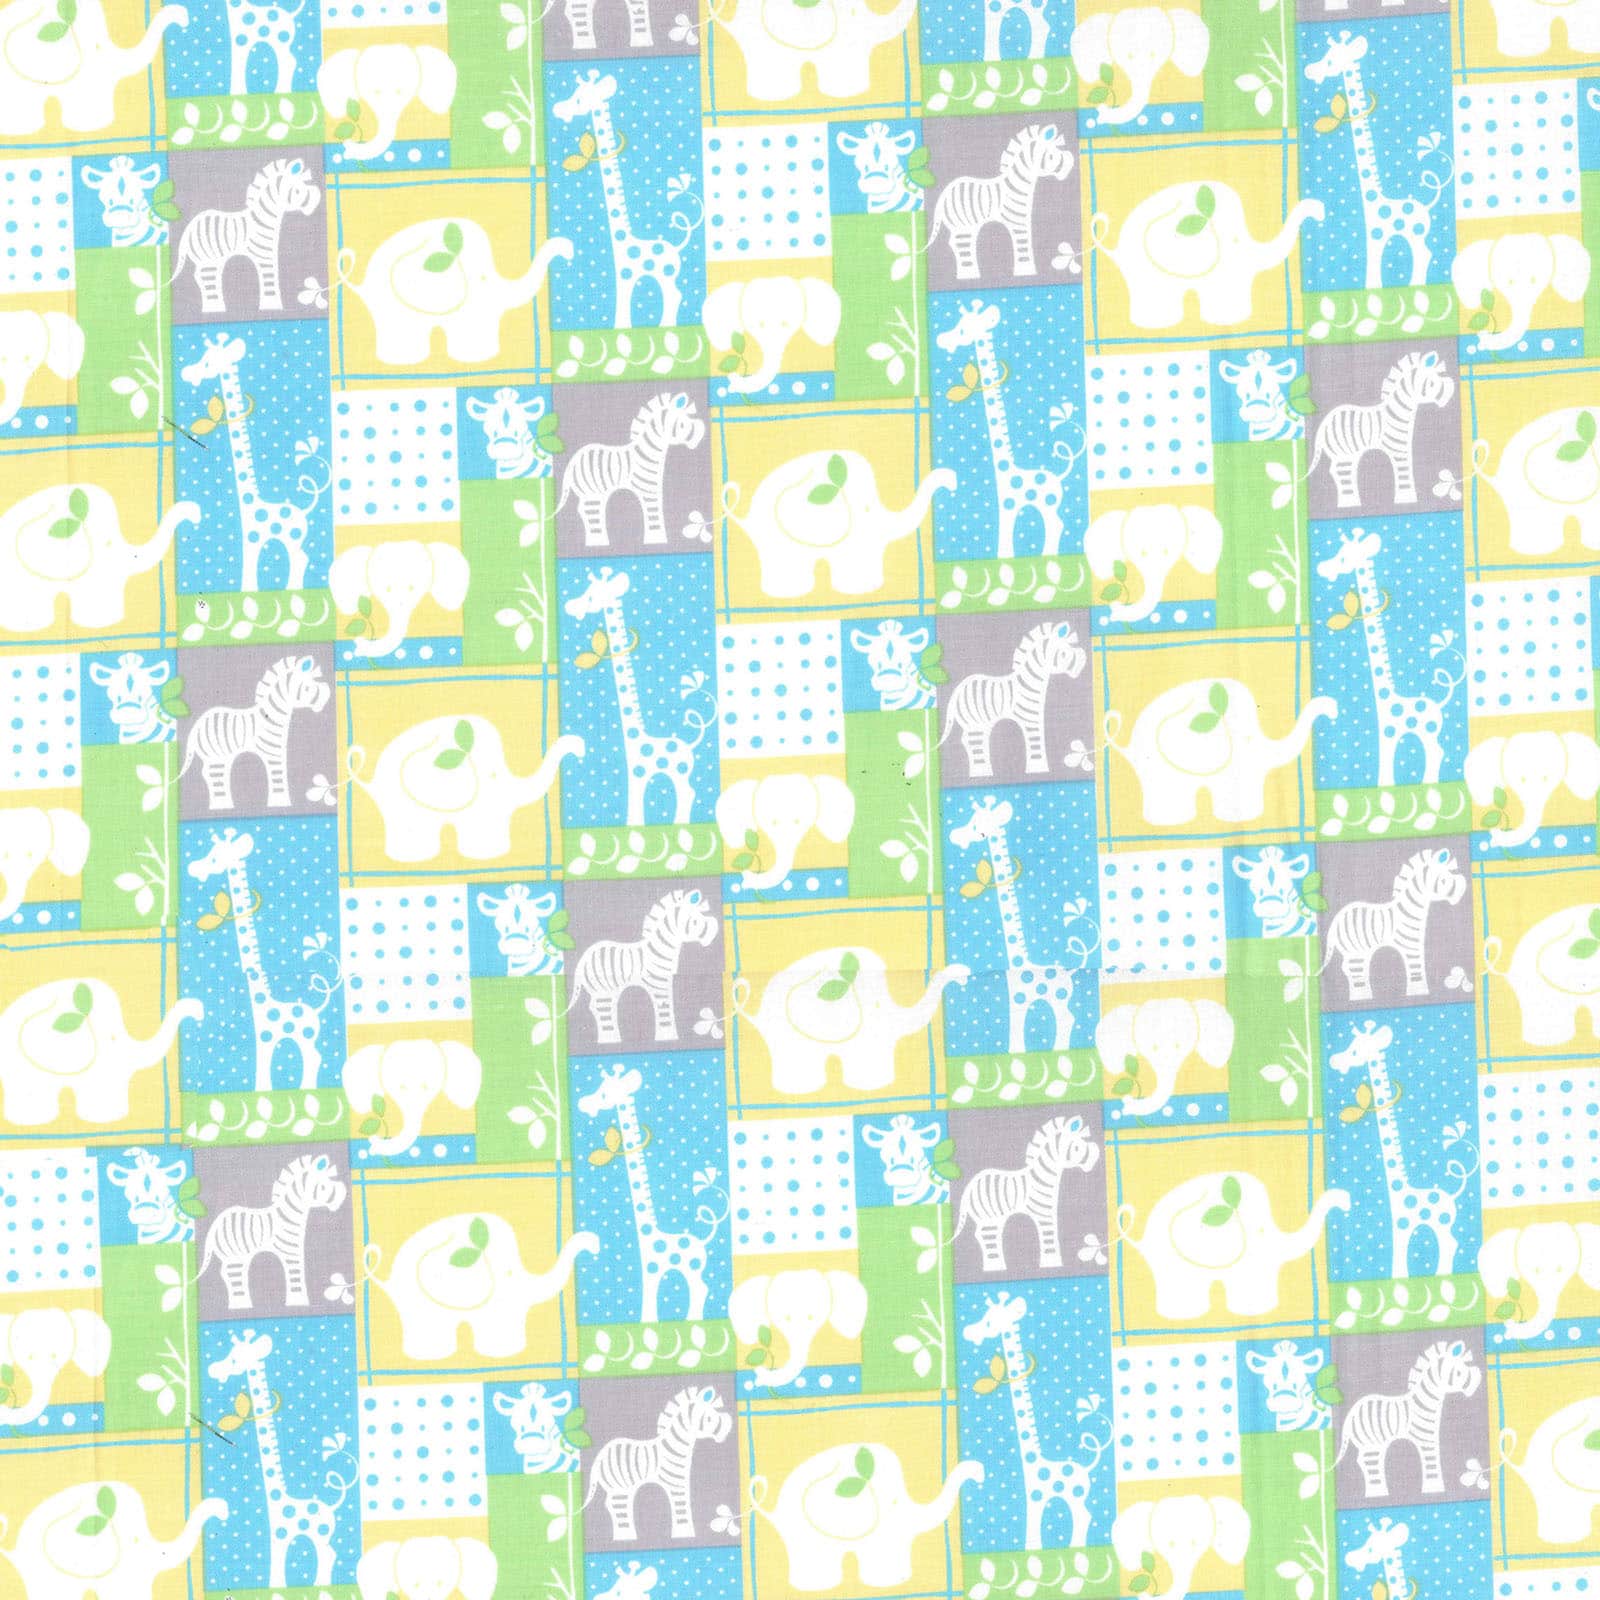 Fabric Traditions Blue Jungle Patch Cotton Fabric